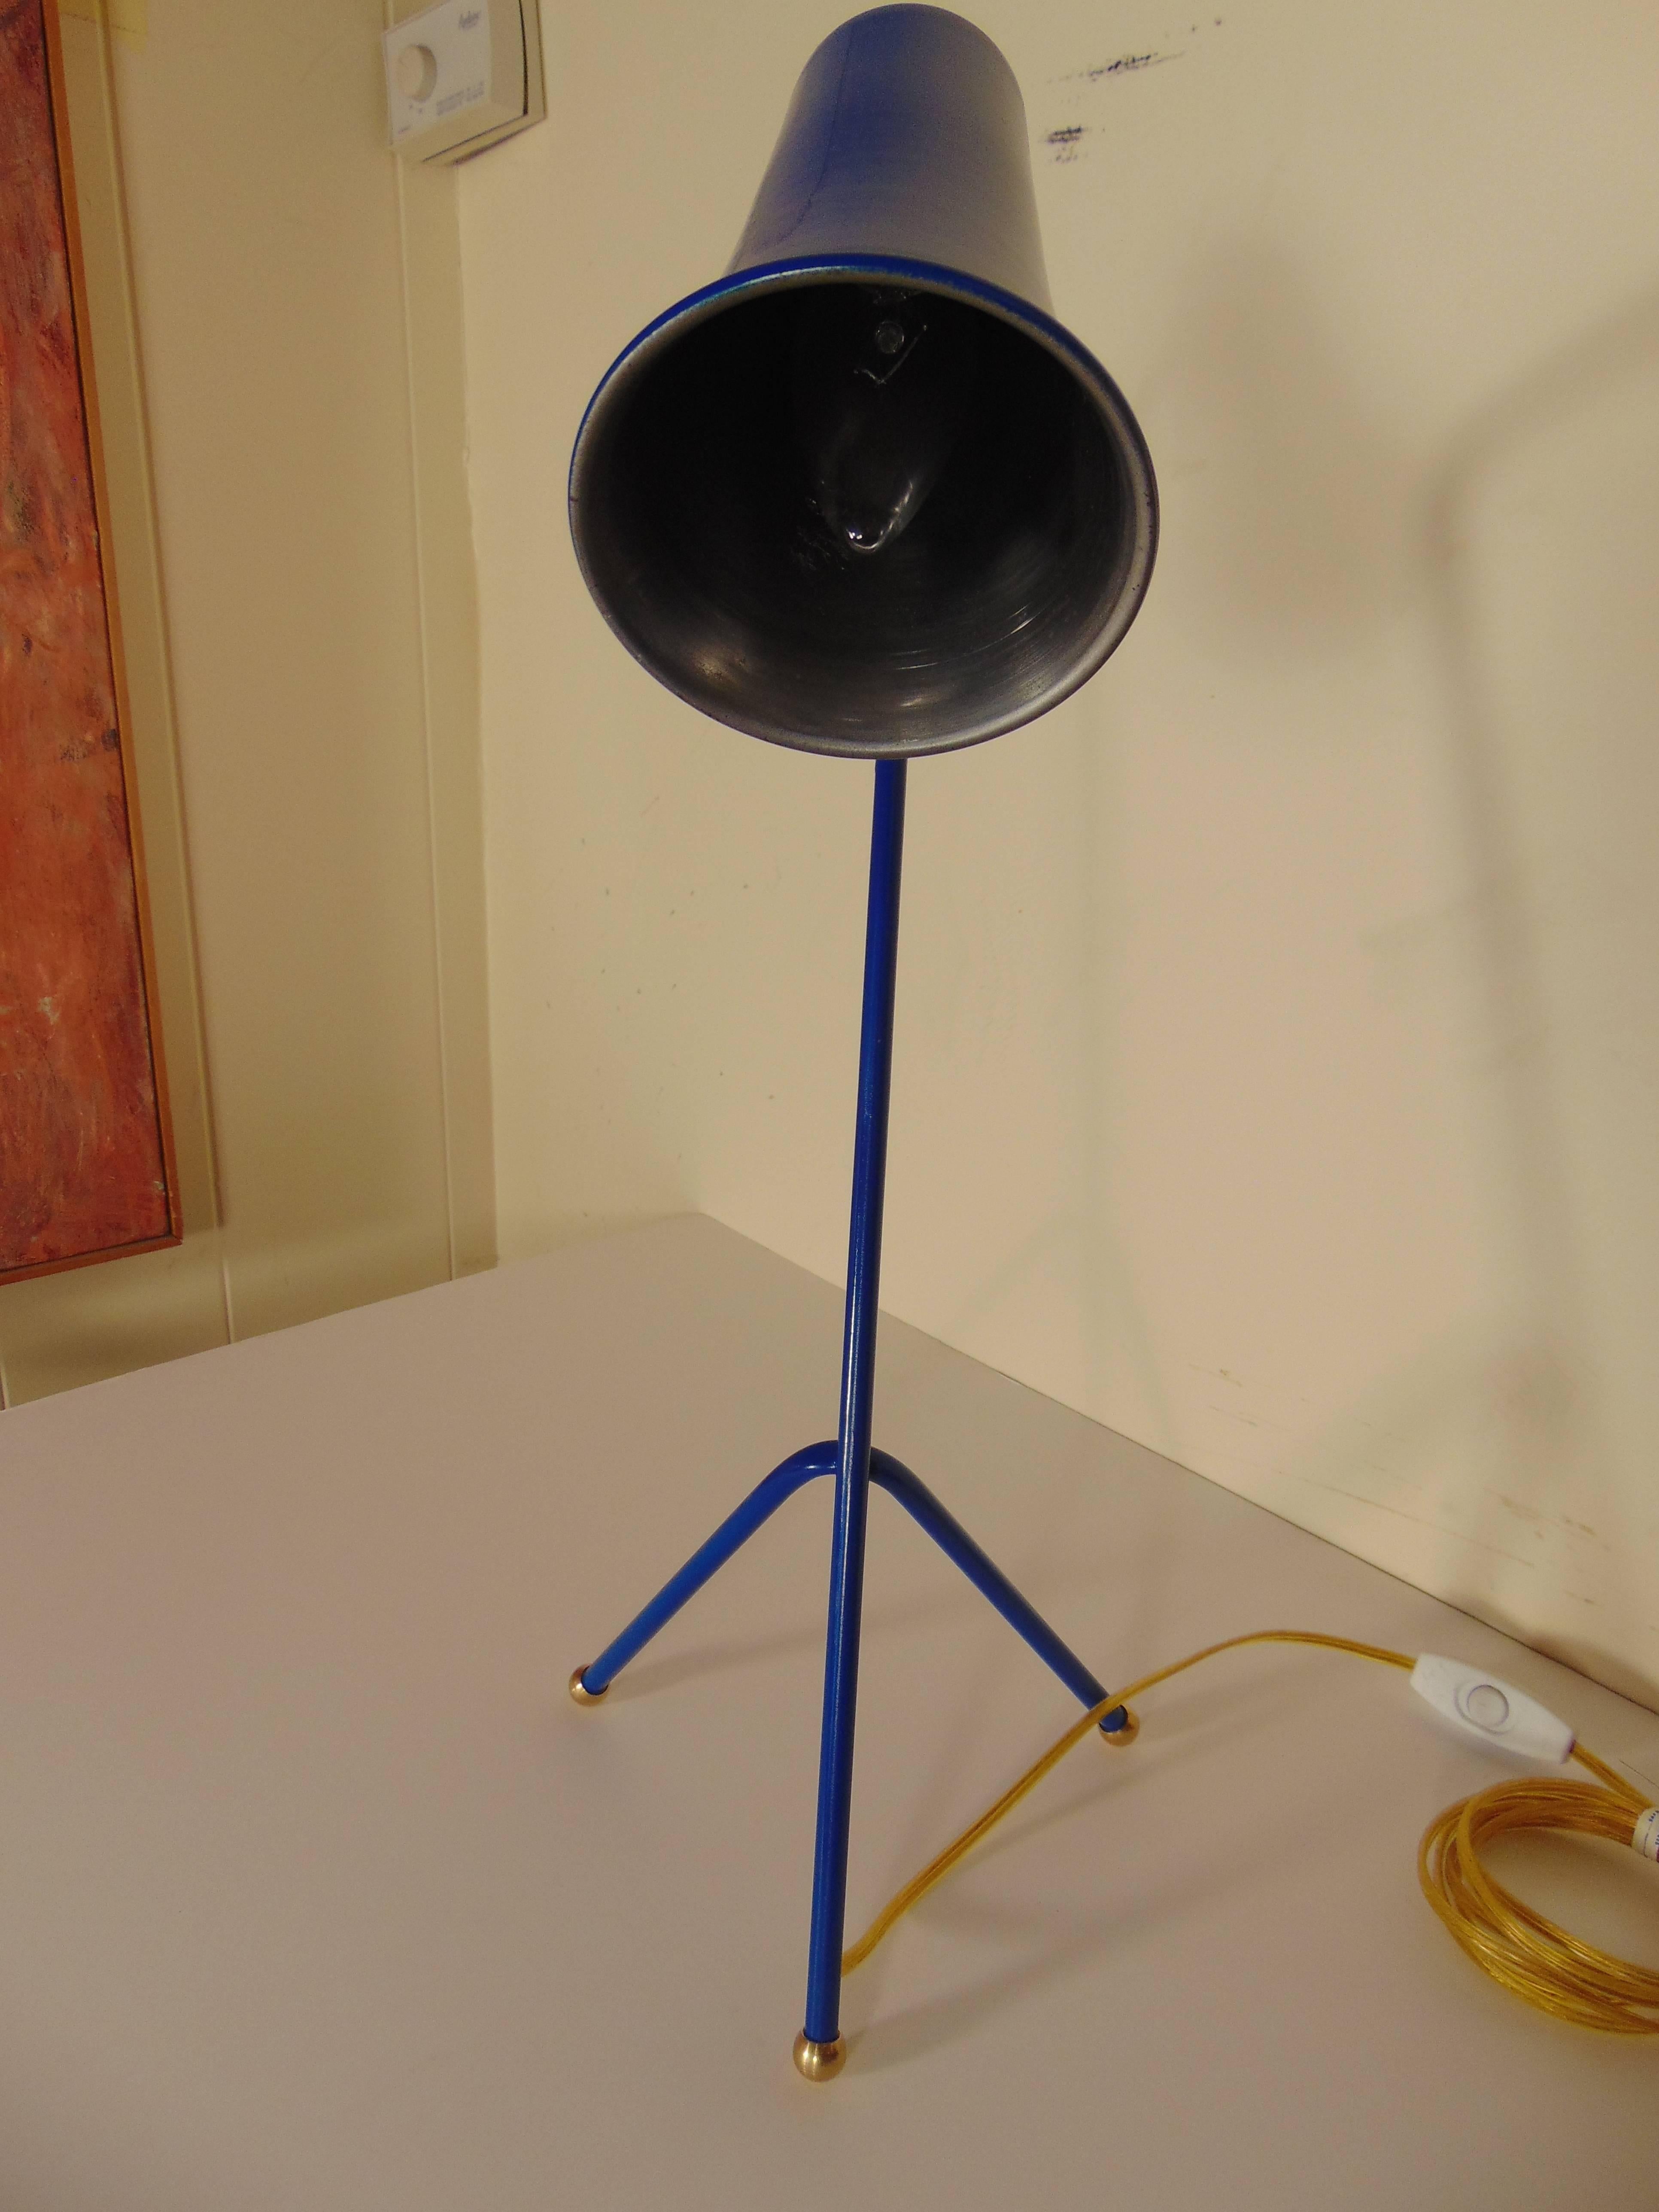 Vanguard Table Lamp, made in the USA by Lou Blass In Excellent Condition For Sale In Hudson, NY